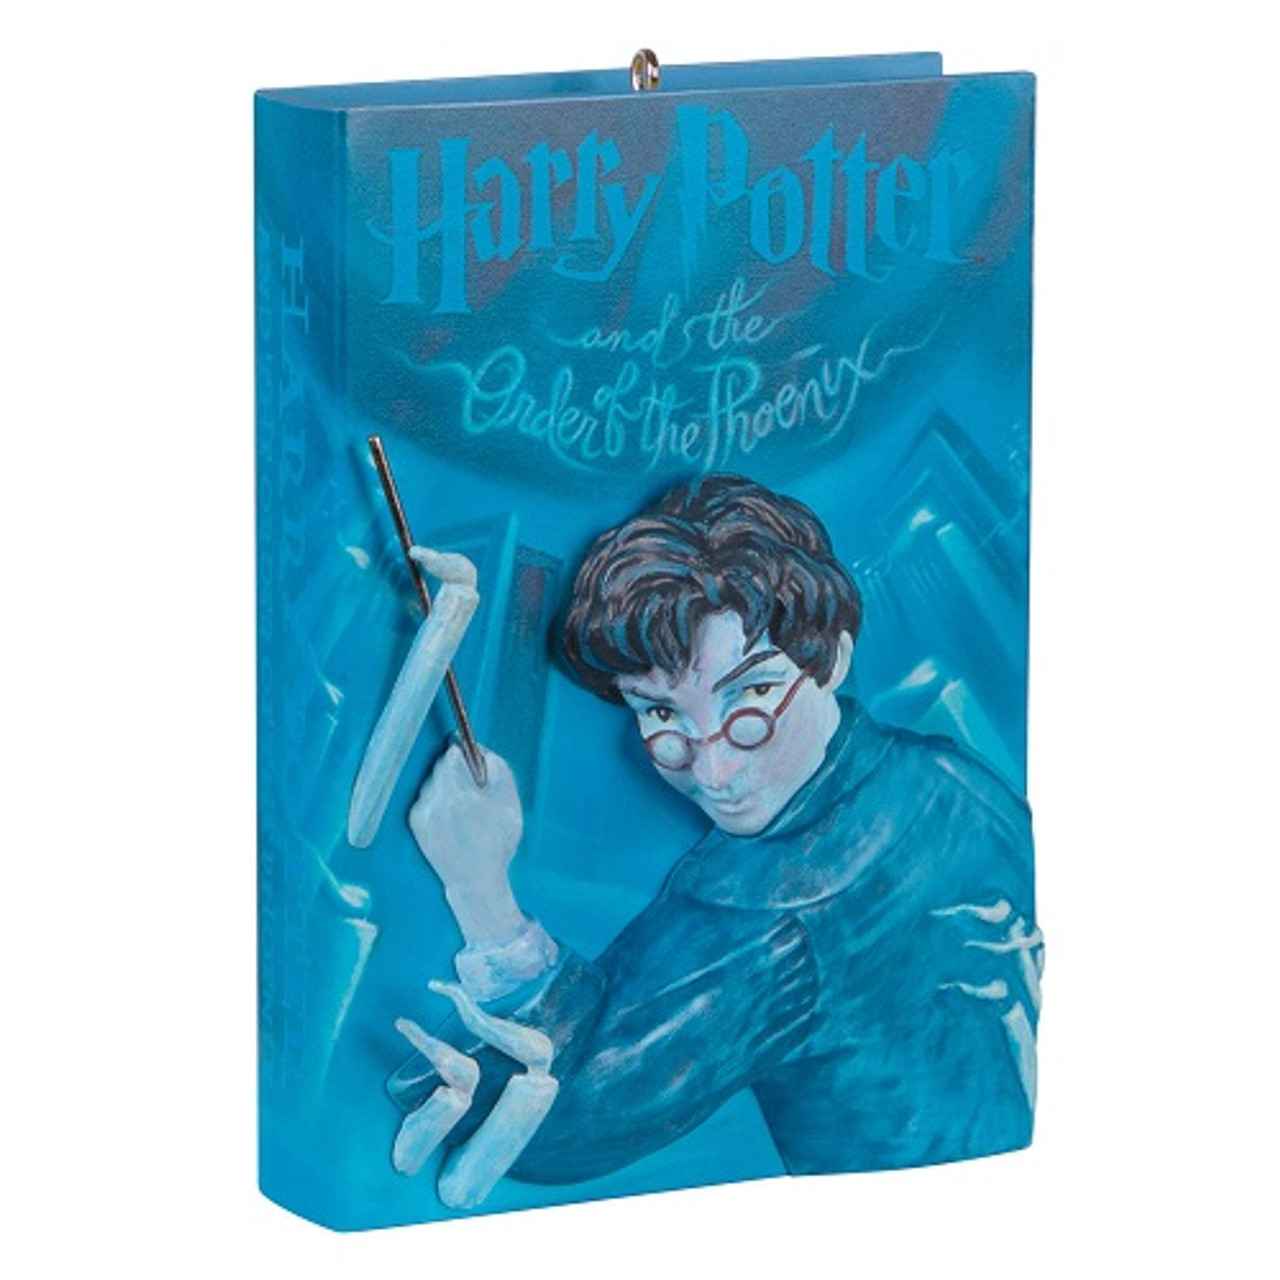 Harry Potter Hallmark Ornaments at The Ornament Factory